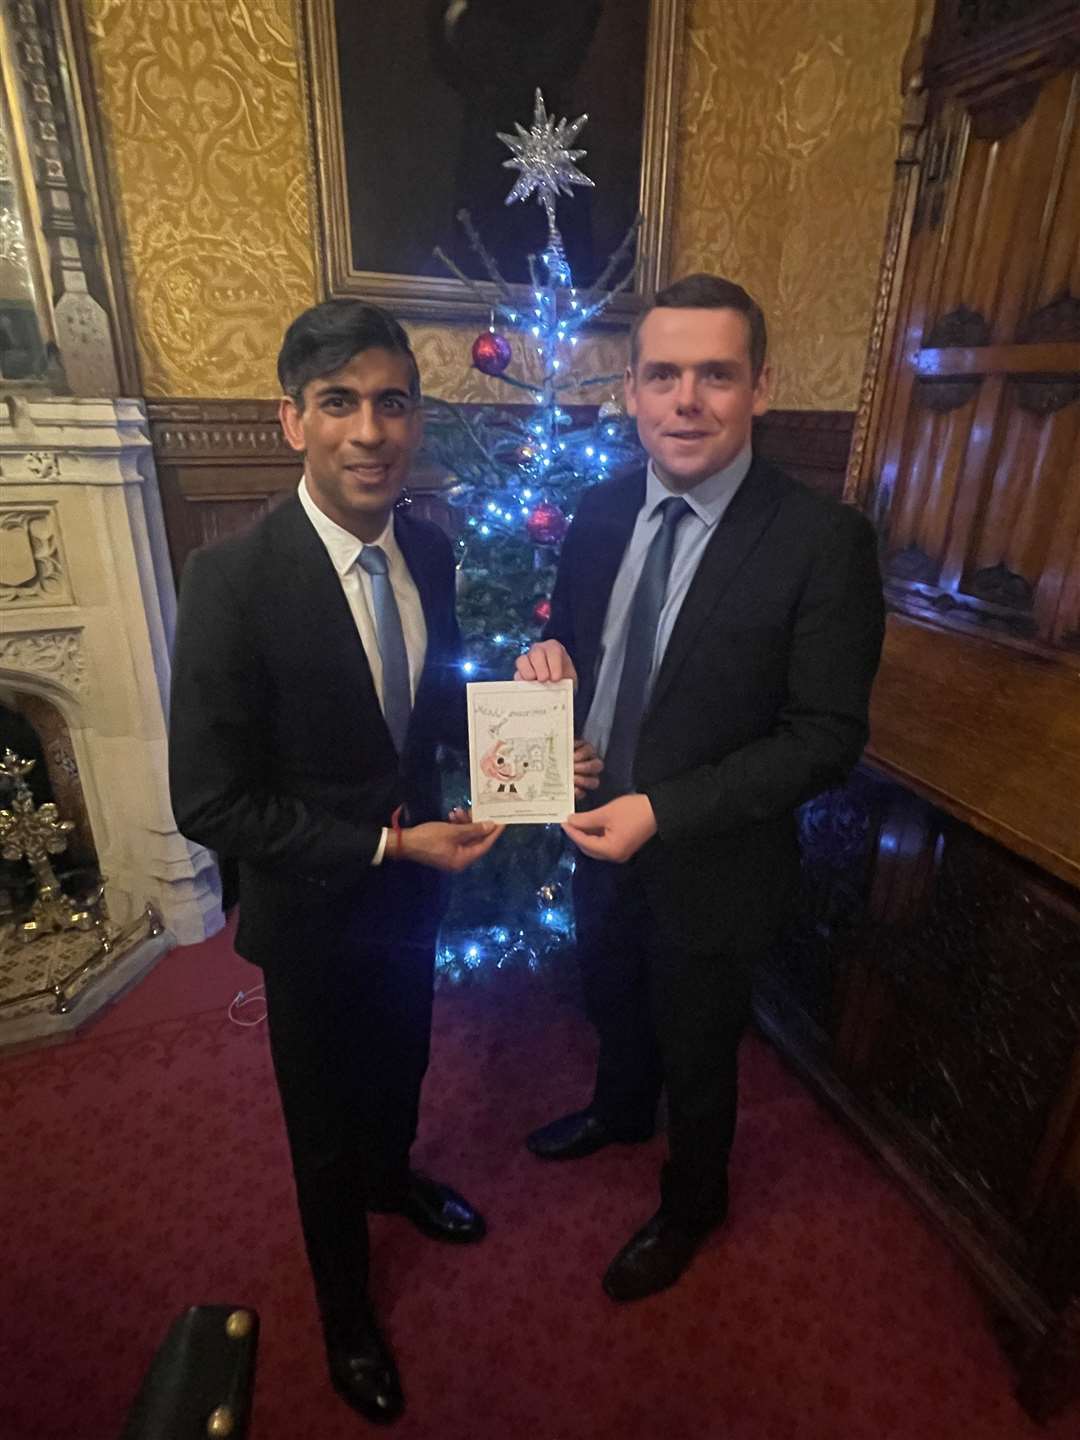 Douglas Ross presents Prime Minister Rishi Sunak with a copy of Chloe's card.